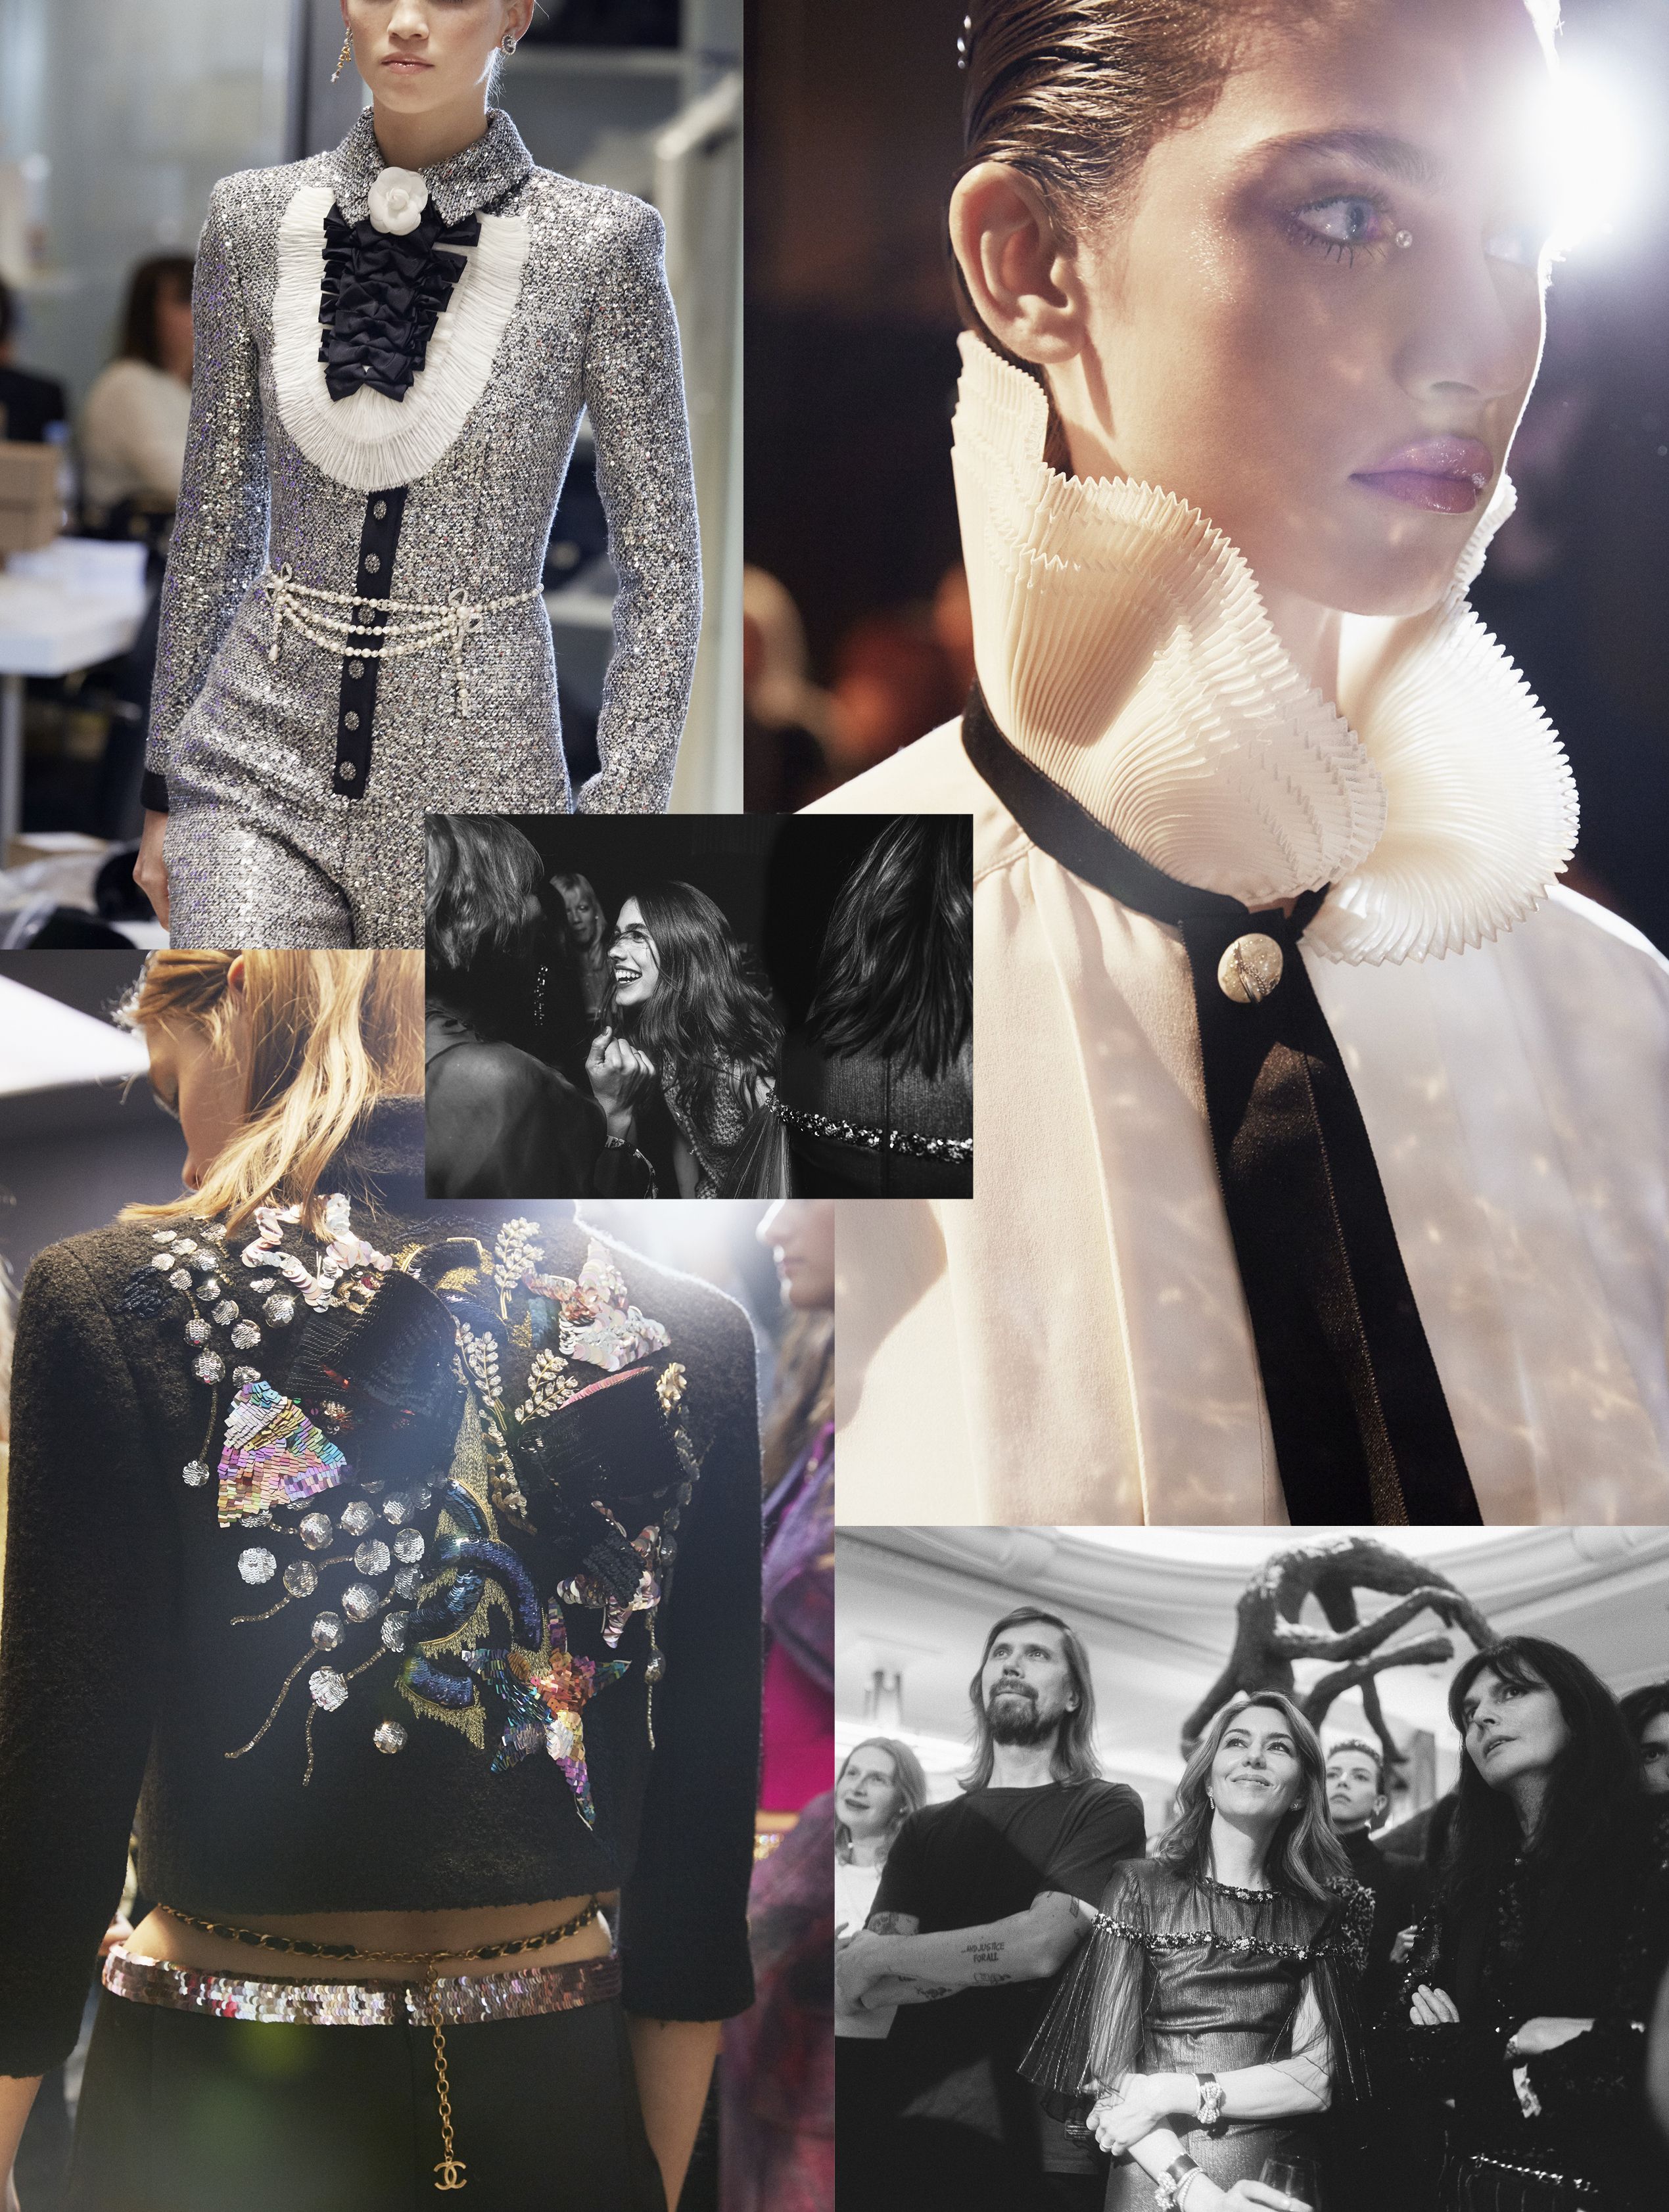 Chanel Metiers d'Art: Is This The Most Important Fashion Show On